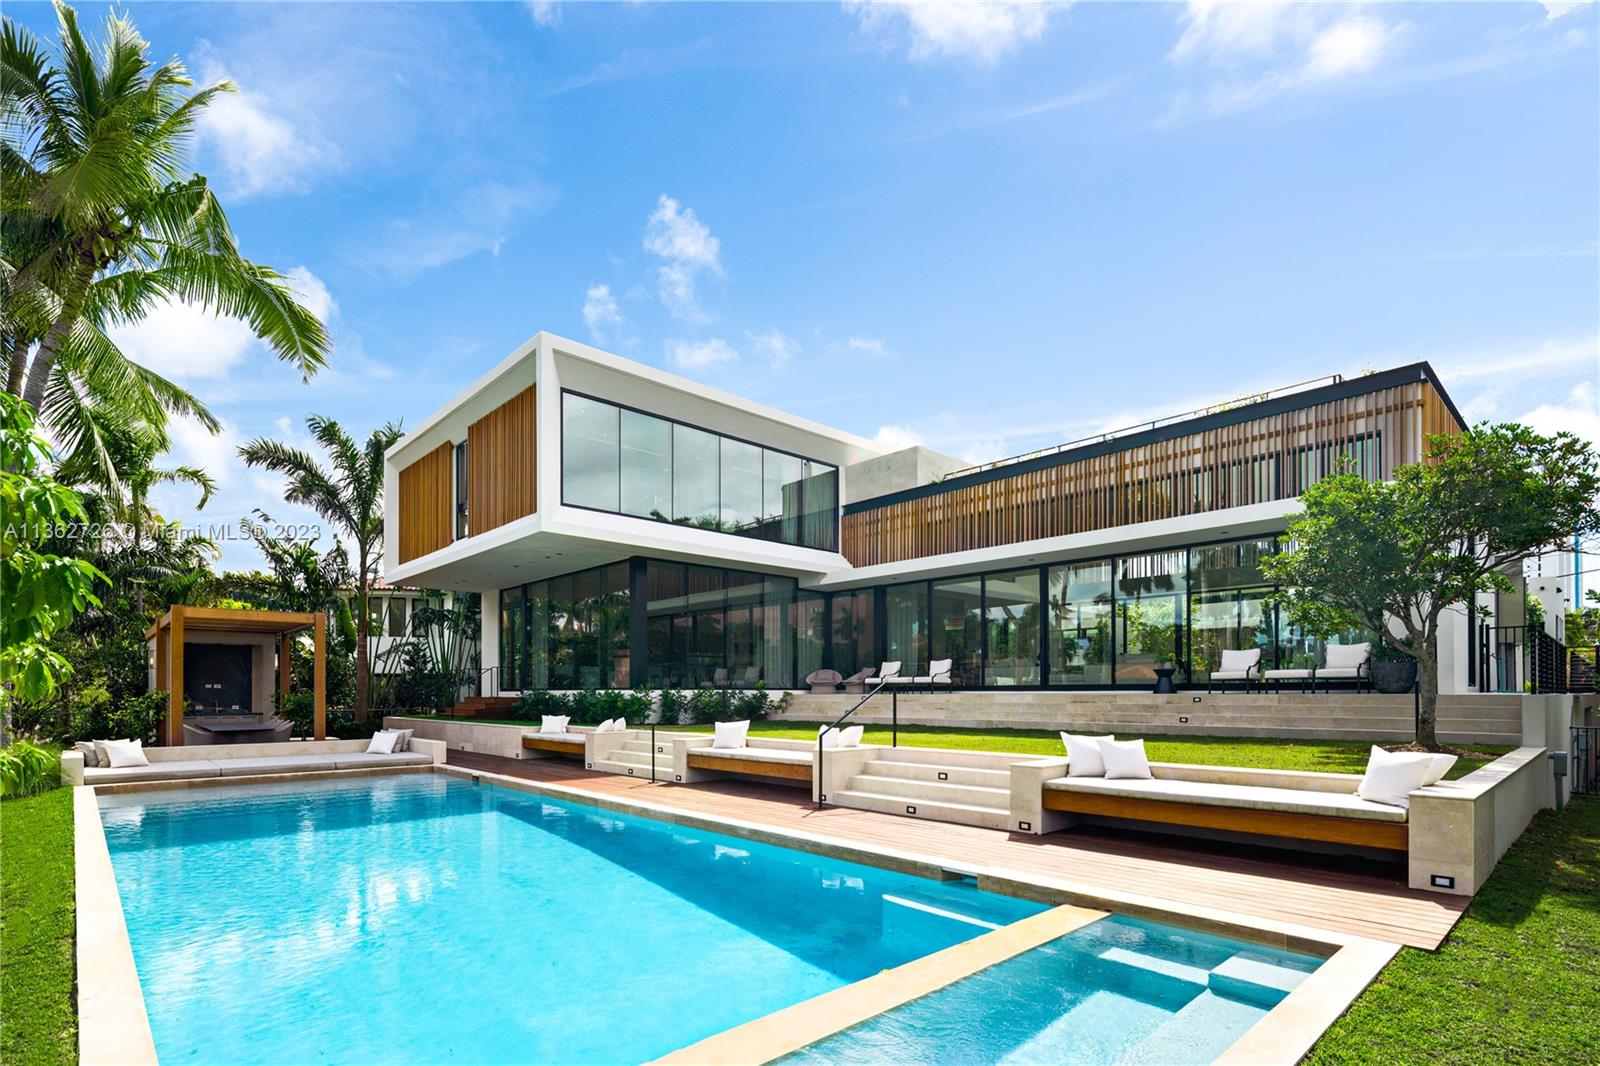 The best pre-construction deal for a waterfront single-family home in Miami Beach! Developed by Todd M. Glaser with architecture by Kobi Karp, this modern masterpiece will comprise approx. 8,500-SF of living areas, 7 bedrooms, 8 baths, luxe amenities, pool, high-end finishes, and more. The home will be situated on an oversized 21,600-SF lot with 100 feet of prime waterfrontage with east exposure and immediate access to the bay – ideal for boaters. Experience luxury living on gated Allison Island - an exclusive community of only waterfront homes - located 2 blocks to the beautiful beaches and La Gorce Country Club, and a short drive to Bal Harbour, Sunset Harbour, Design District, and airport. Seller financing available. Also, for sale as a vacant land at $8.95M